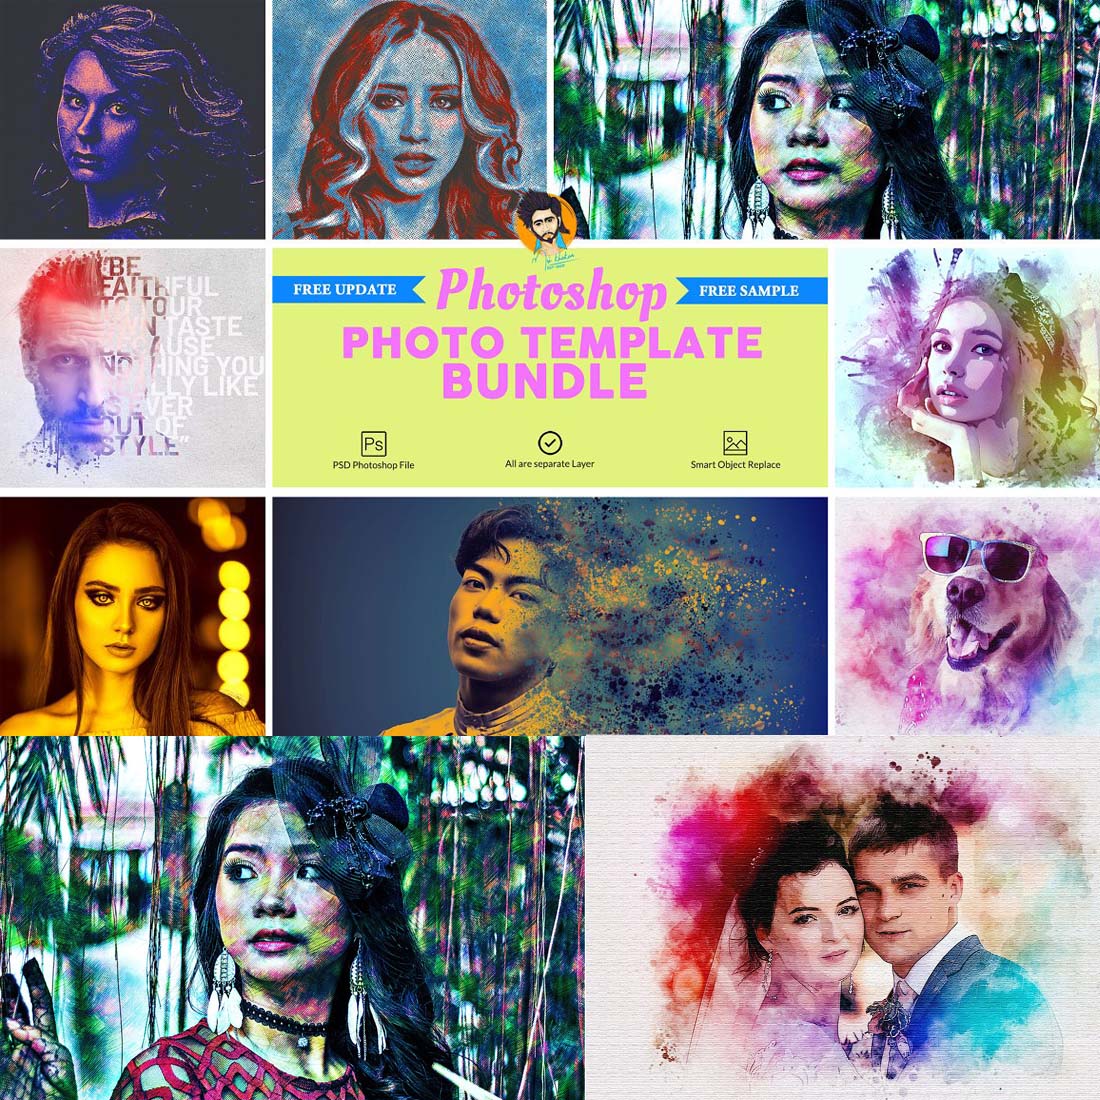 Popular Effect for Photoshop Bundle cover image.